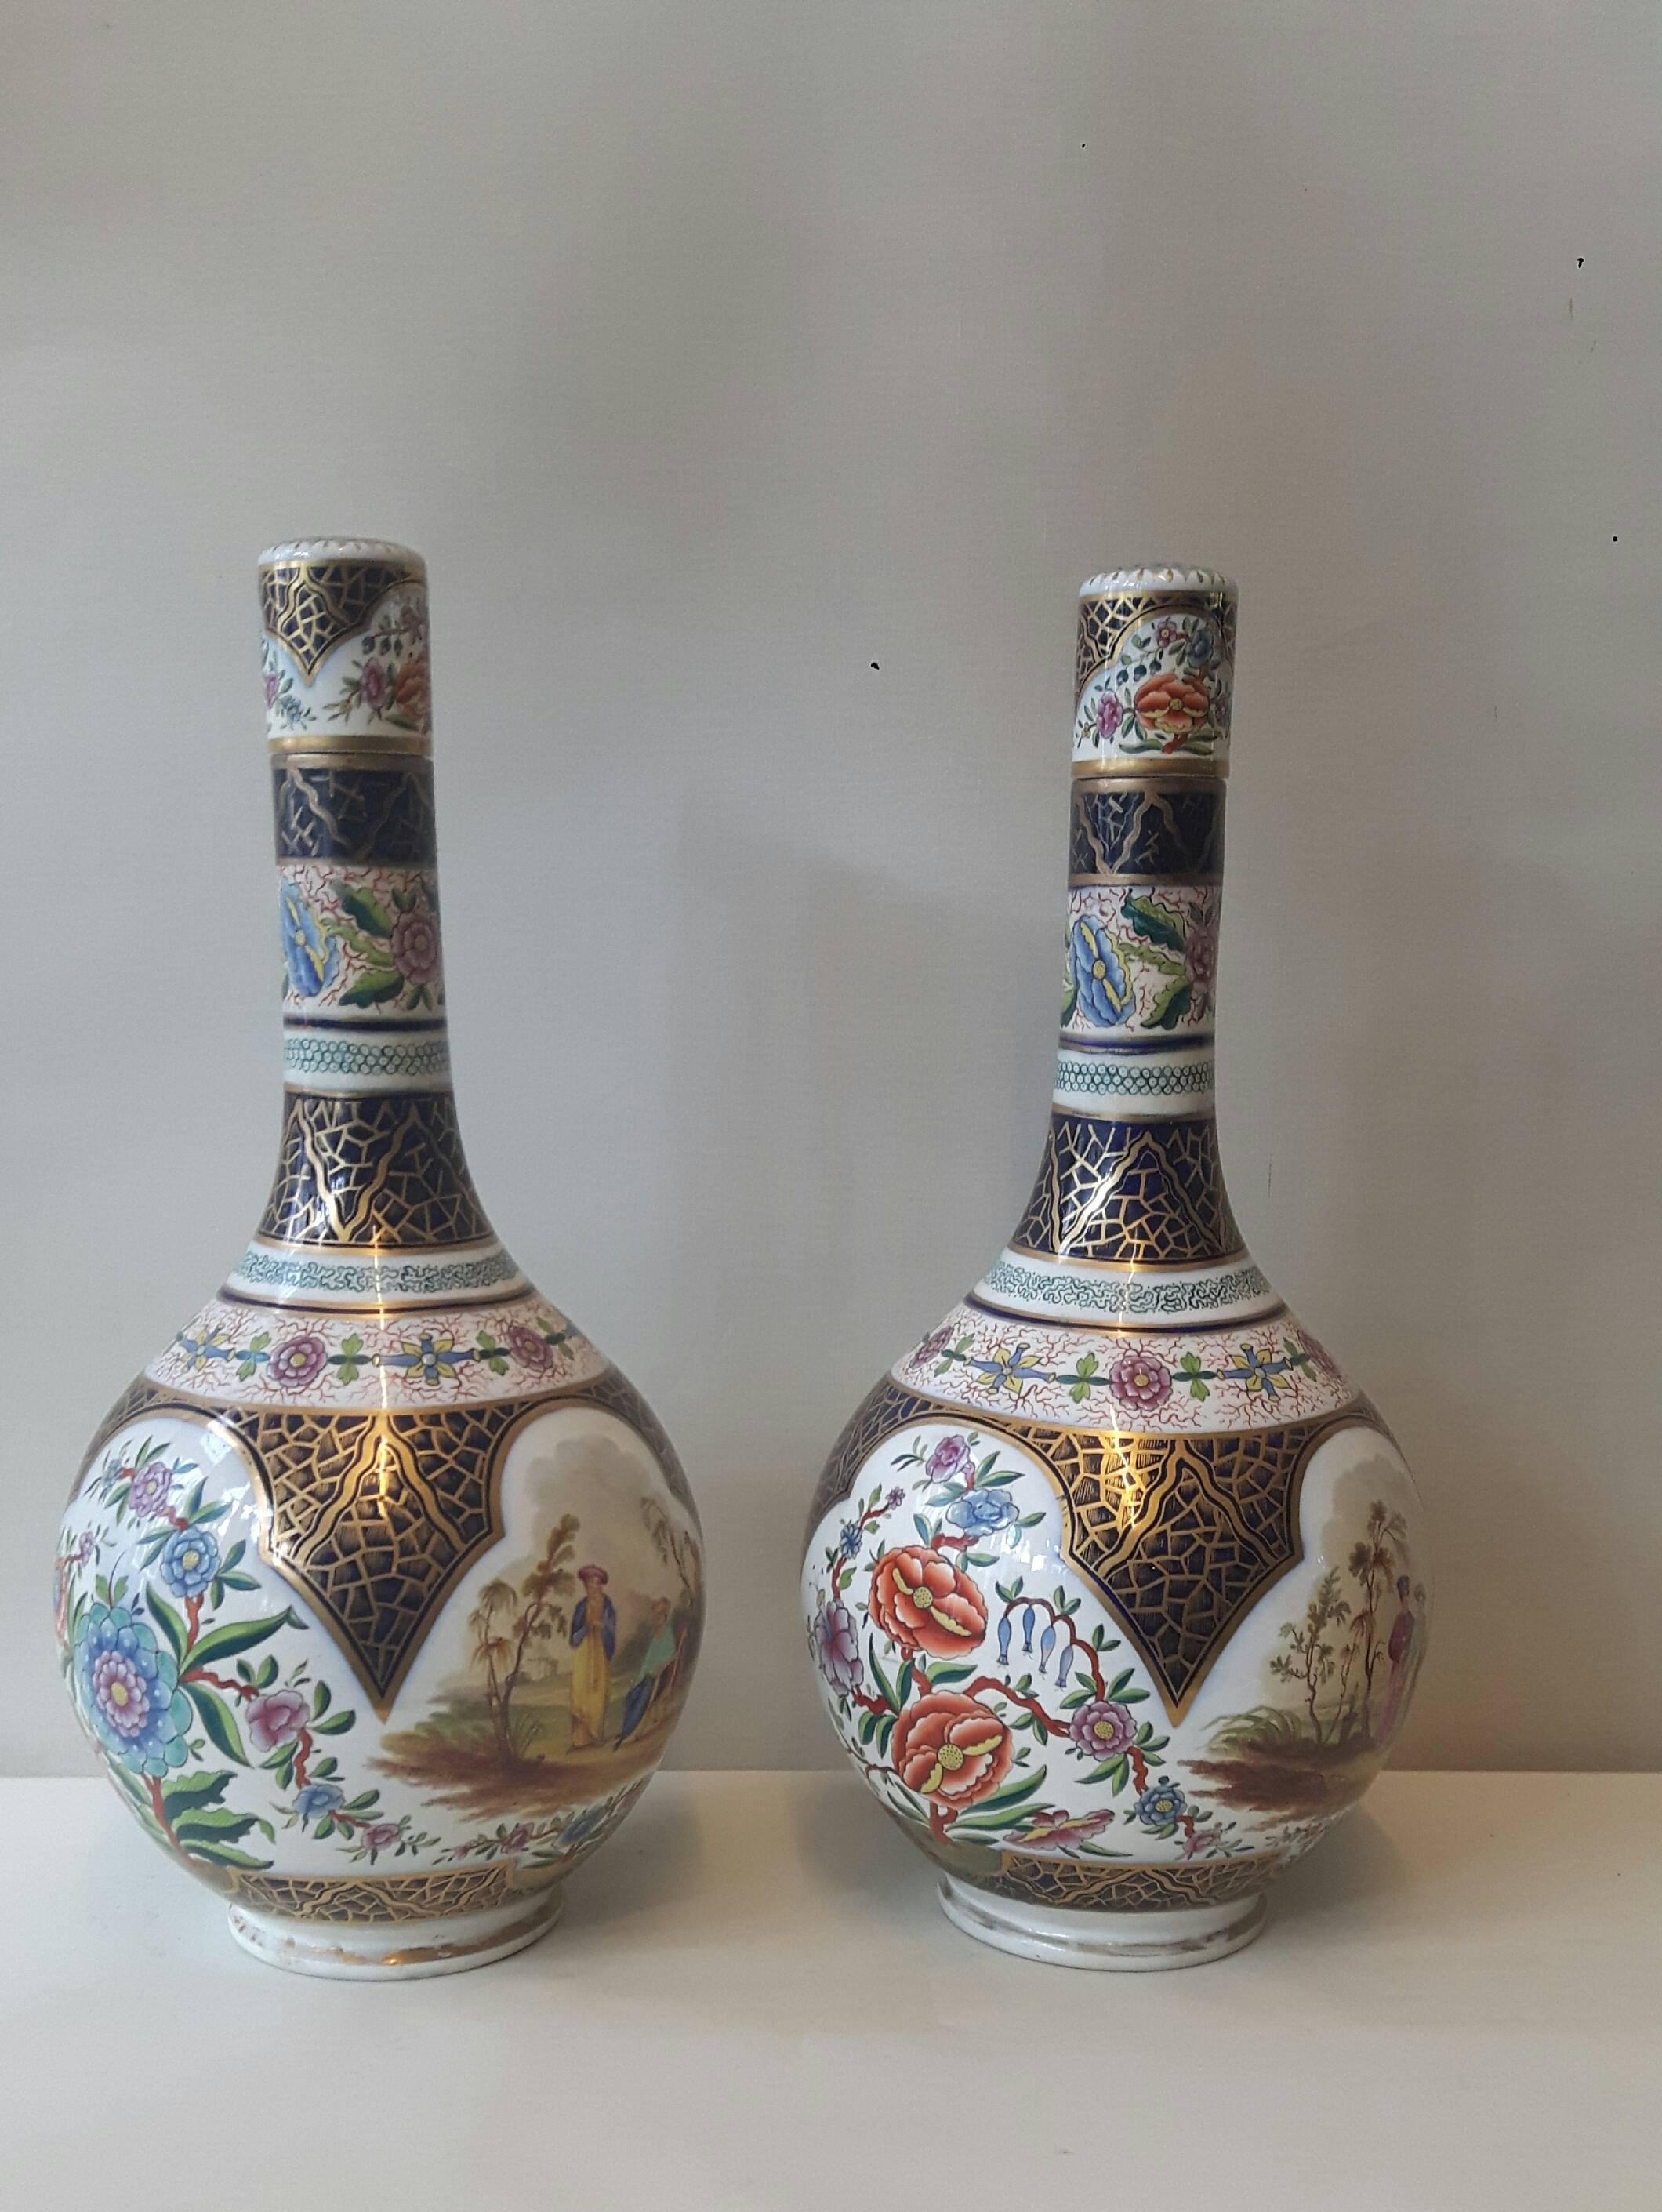 A lovely pair of bulbous-shaped Continental porcelain vases and covers. the central parts hand-decorated with cartouches of Eastern-style courting and flower scenes, the necks sporting bands of flower garlands, all on a heavily painted blue and